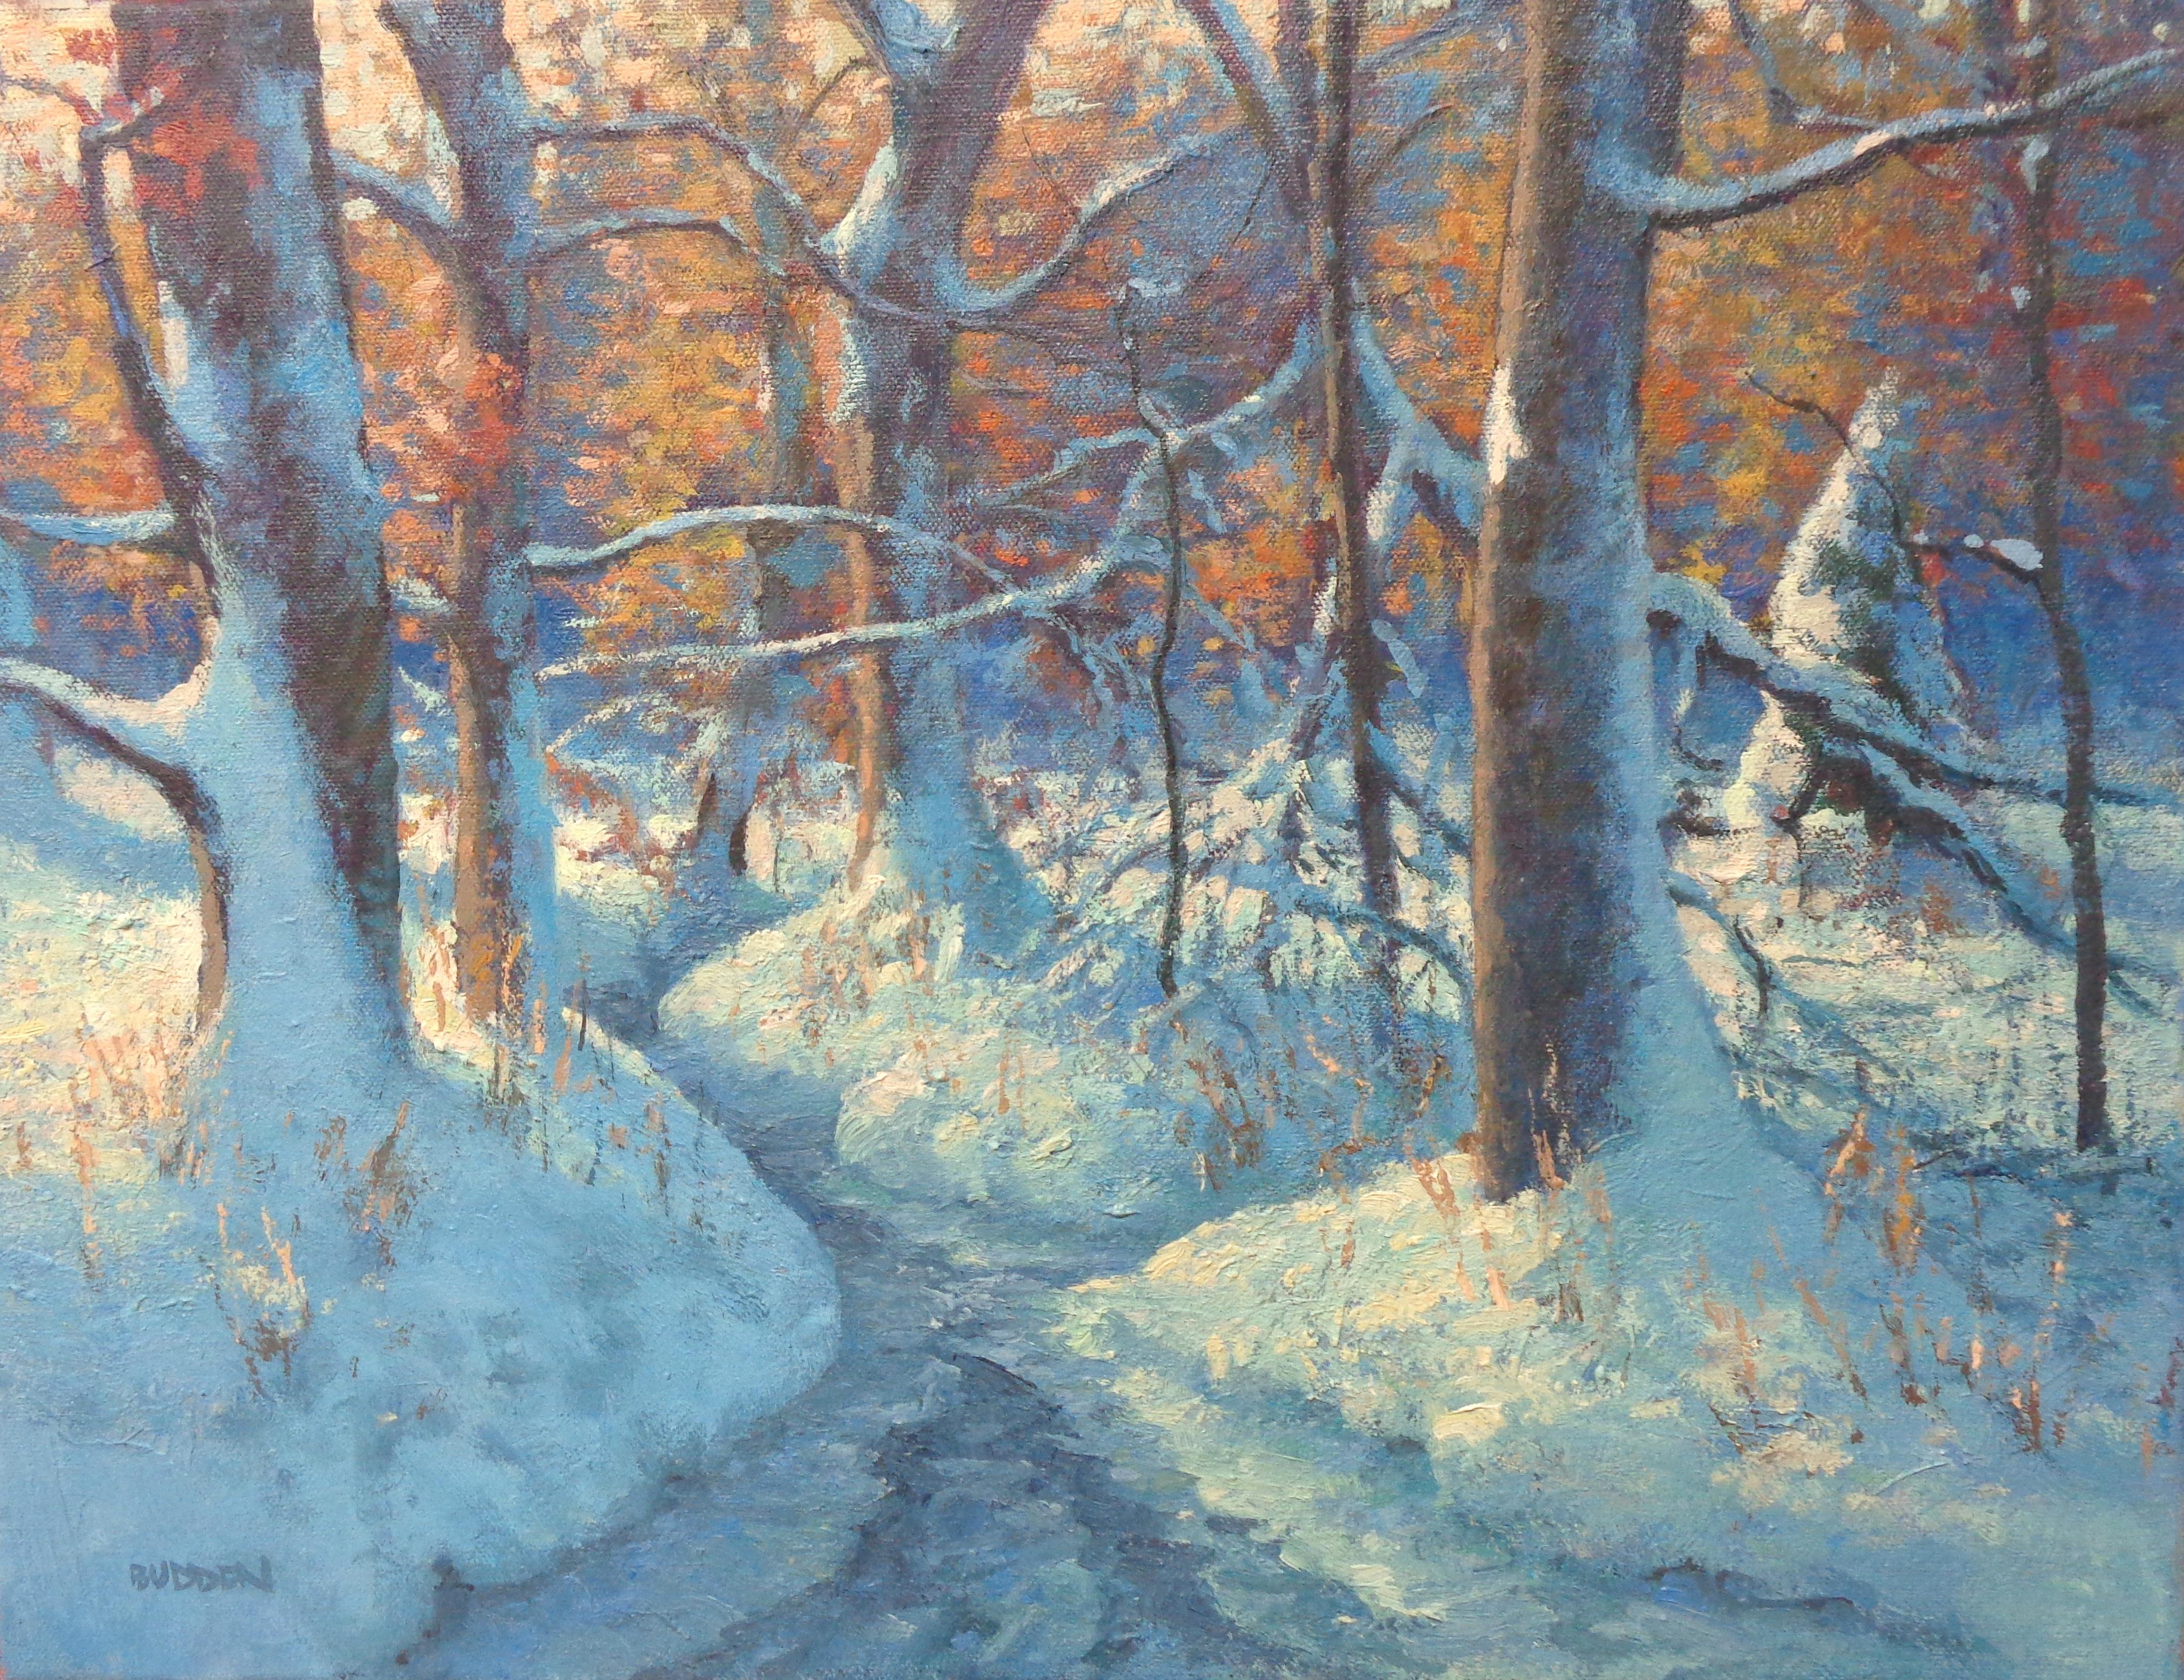 Winter Wonderland
oil/canvas 14 x 18 unframed
An oil painting on canvas by award winning contemporary artist Michael Budden that showcases a beautifully backlit winter woodland interior scene and stream. The image measures 14 x 18 unframed. 